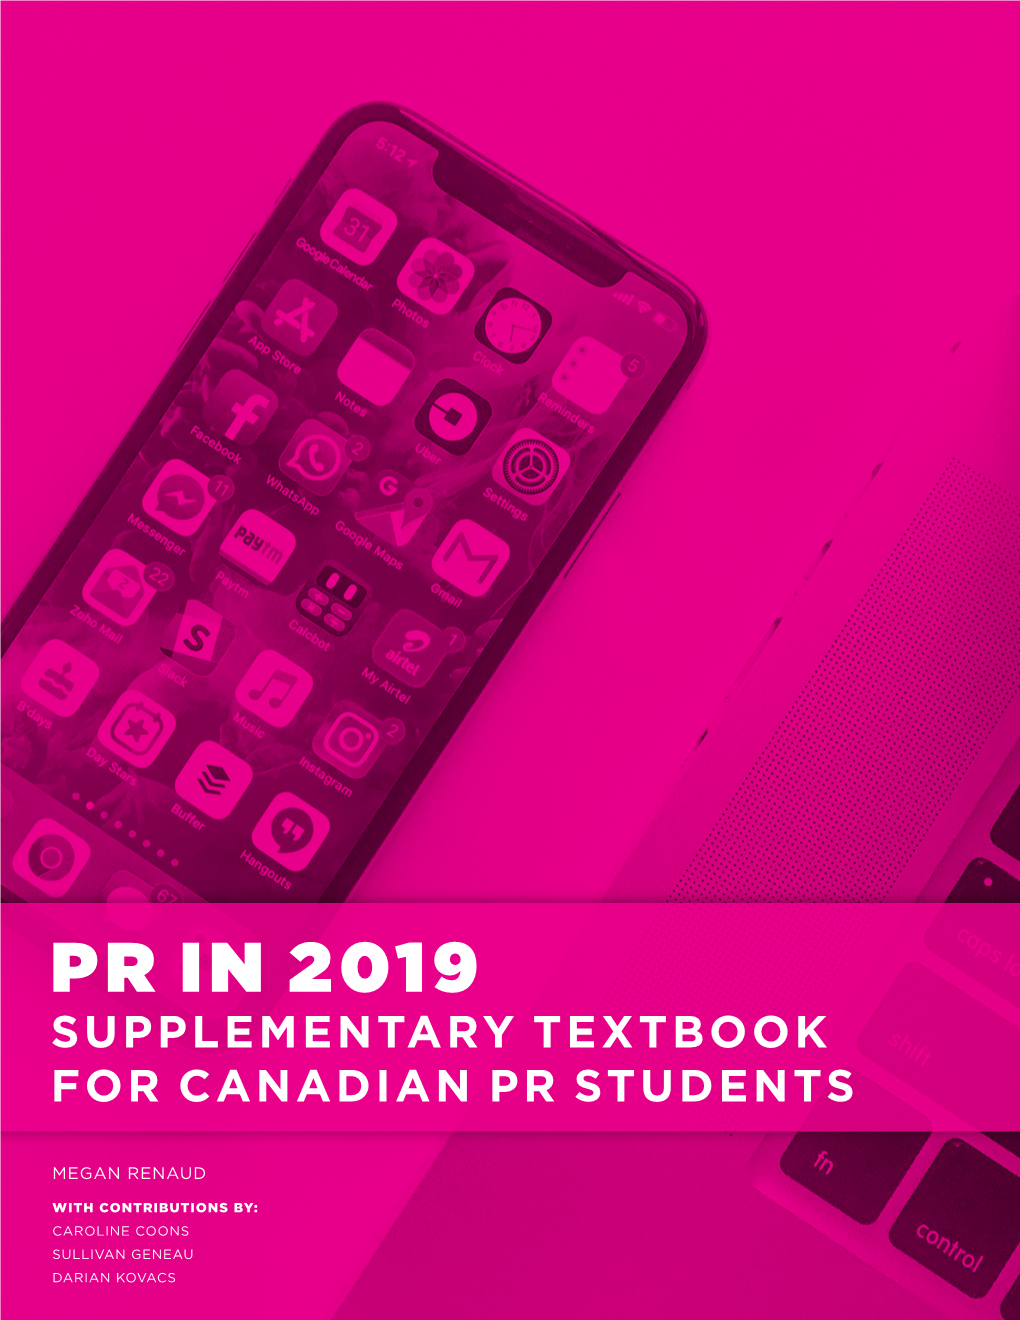 Pr in 2019 Supplementary Textbook for Canadian Pr Students